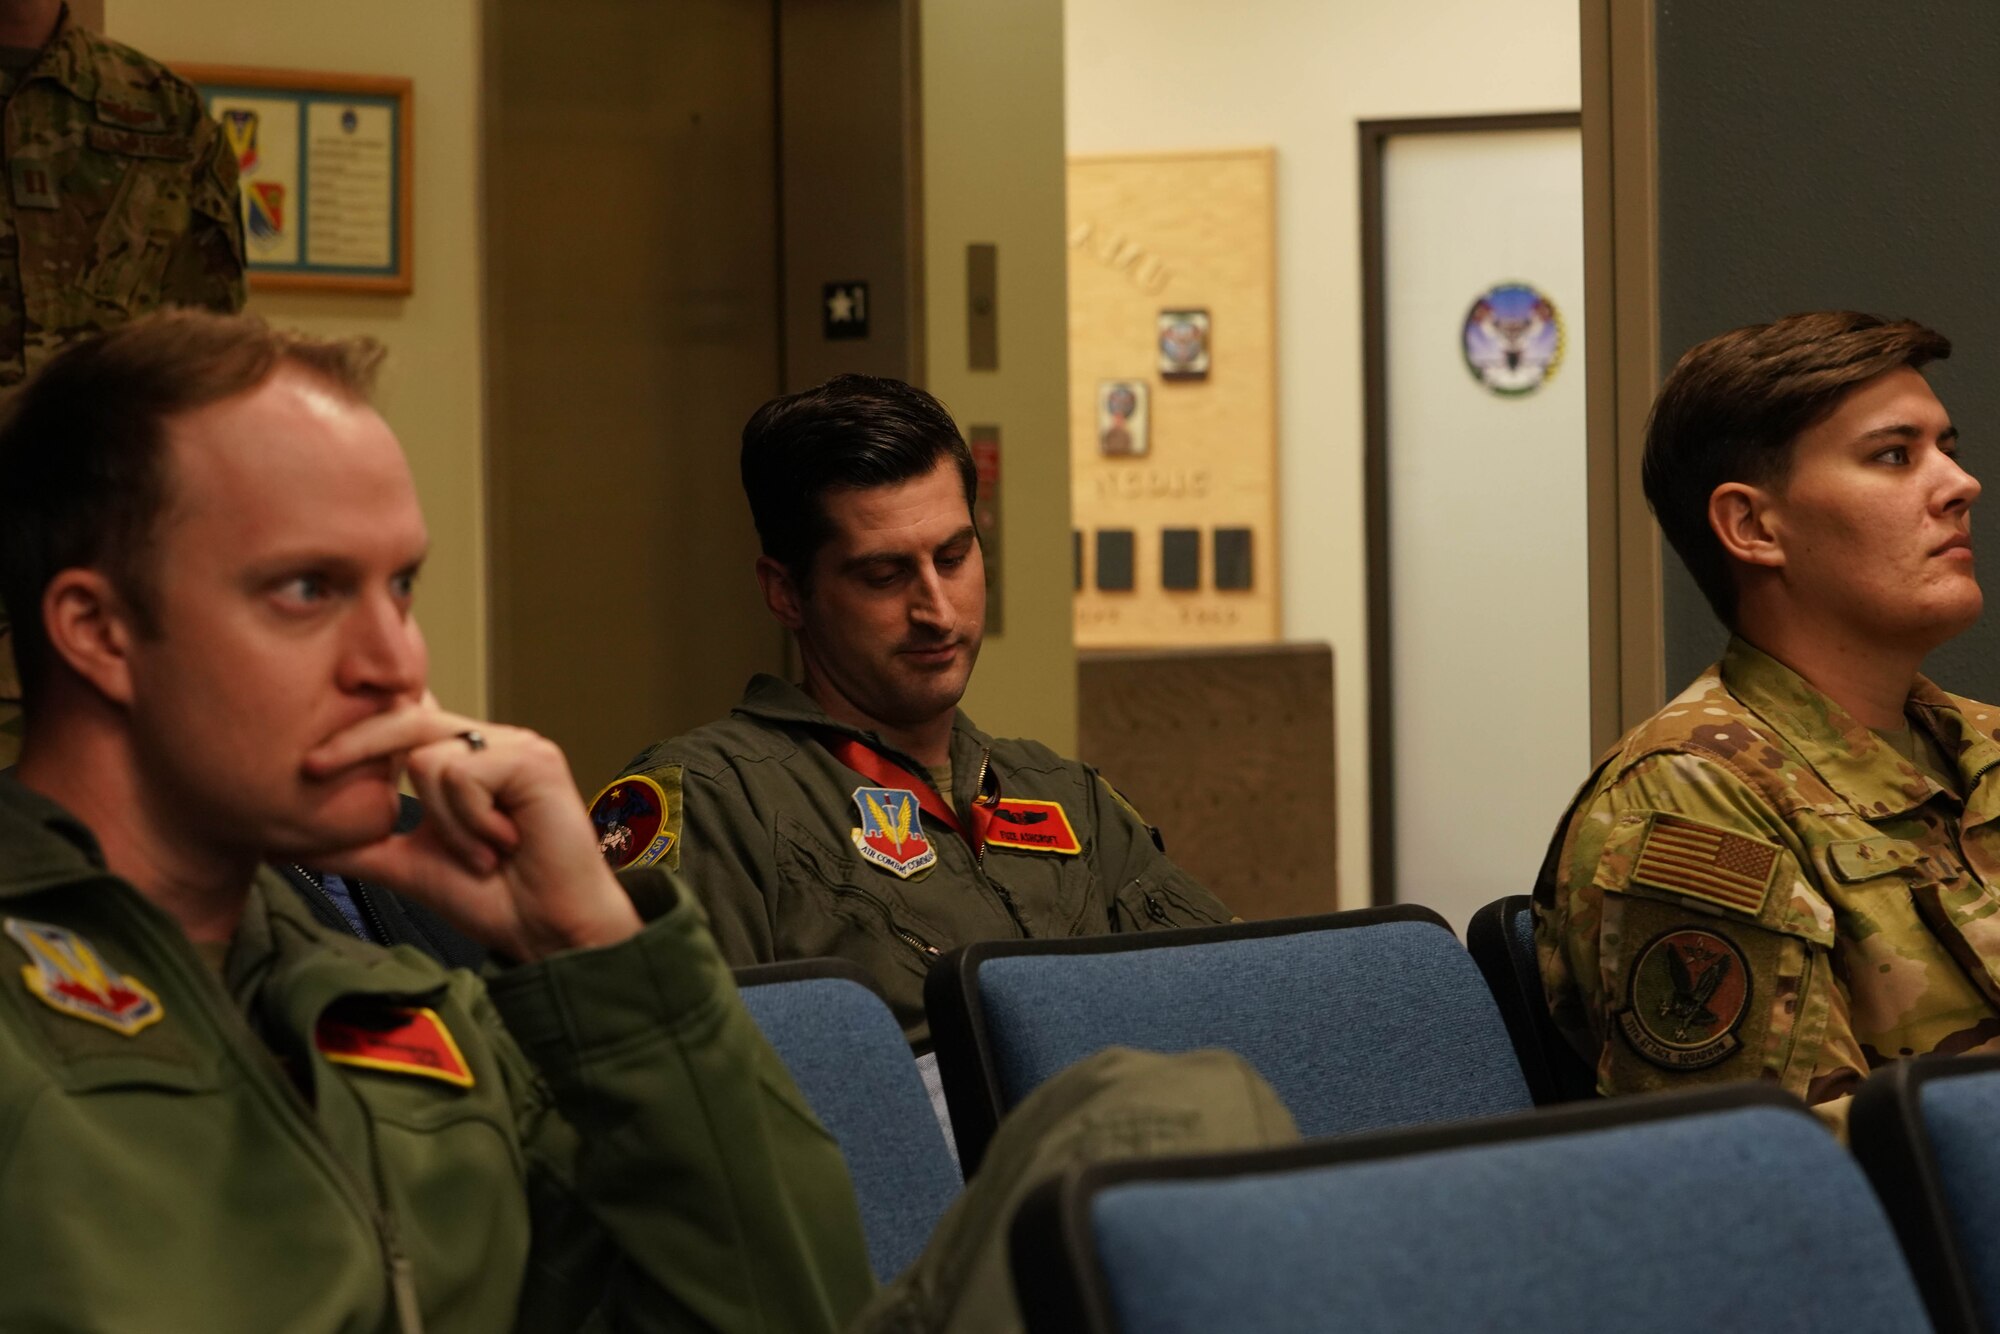 A man in a military flight suit takes notes sitting in an auditorium in between two other people in military uniforms.